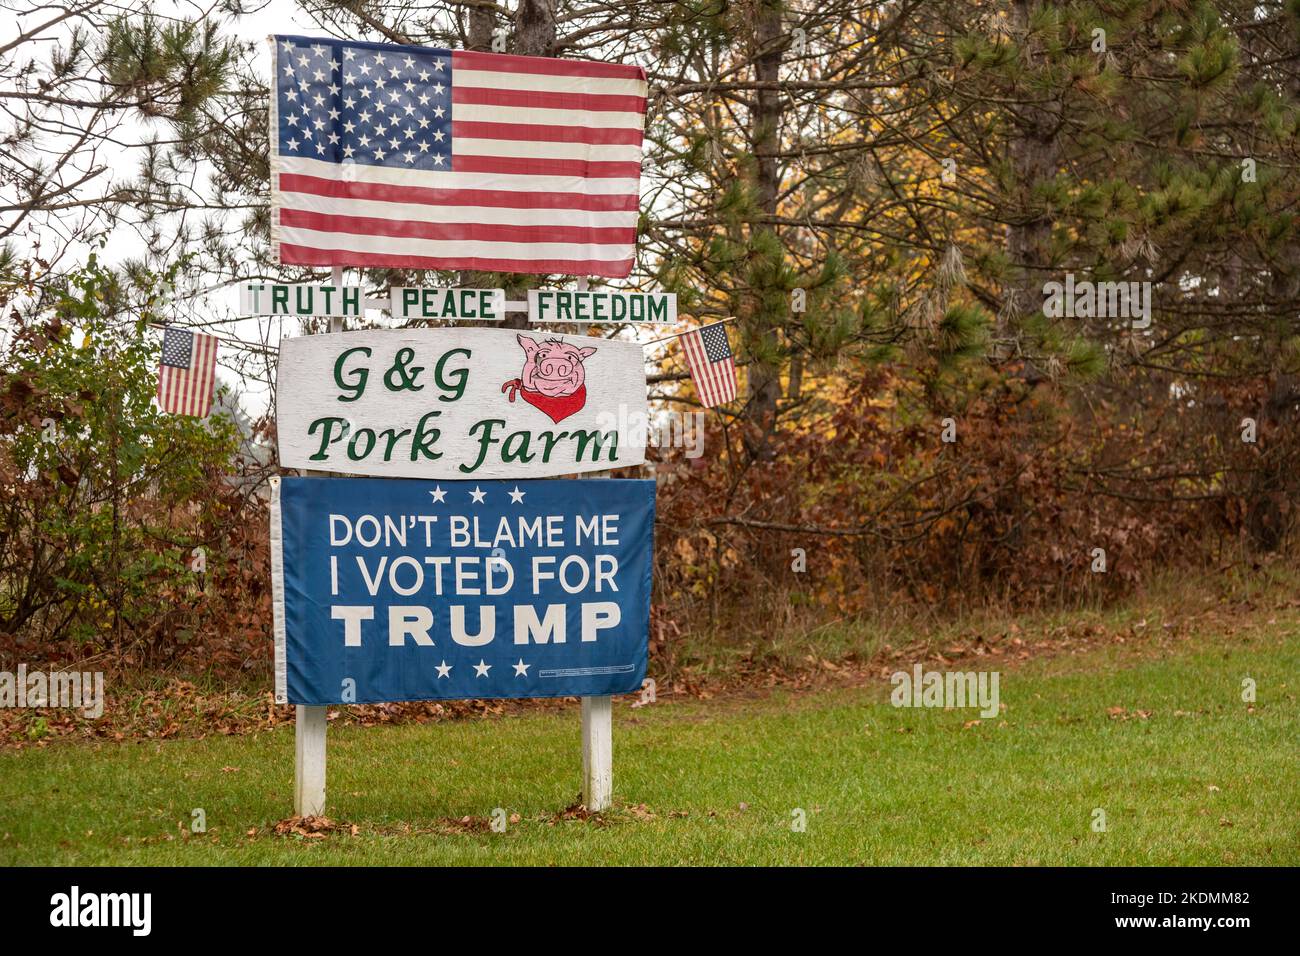 Middleville, Michigan - A sign reading 'Don't Blame Me. I Voted for Trump' at the G&G Pork Farm. Stock Photo